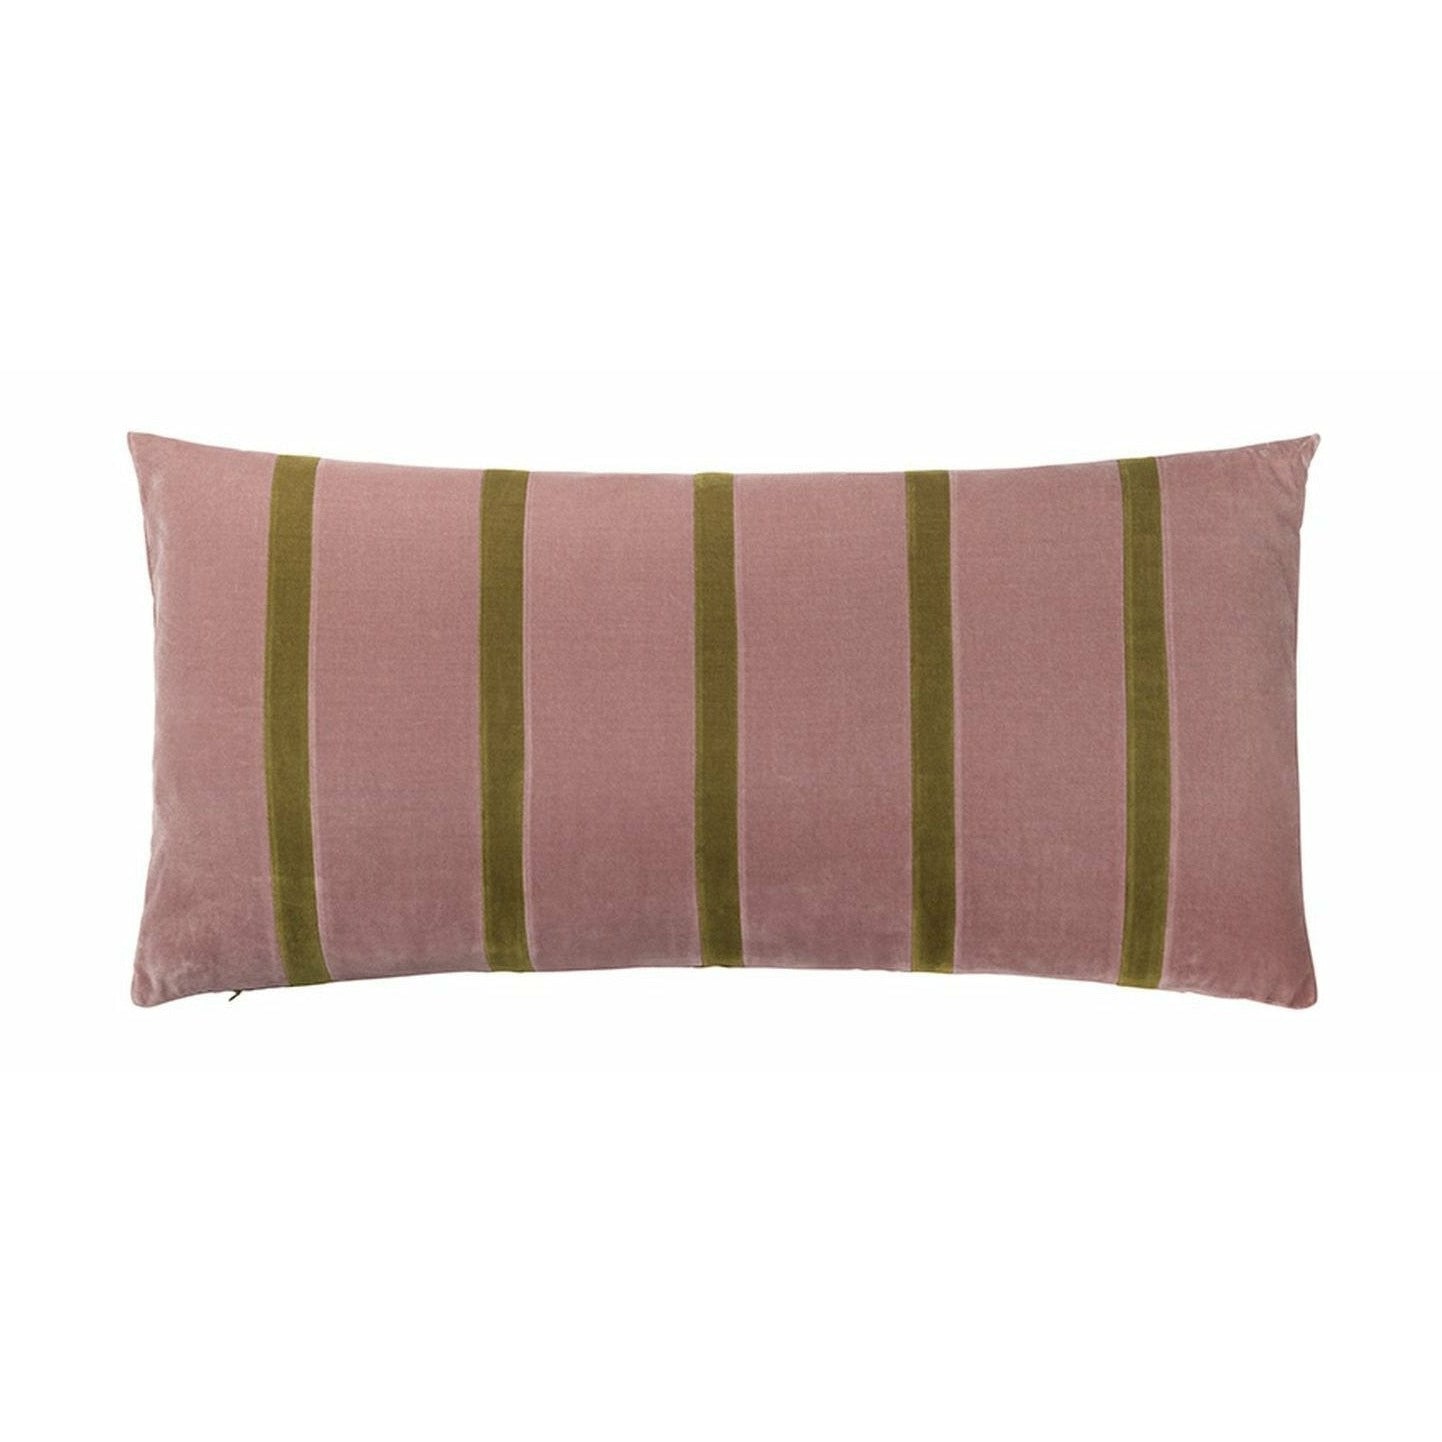 Christina Lundsteen Pippa Velor Cushion, Old Rose /Willow